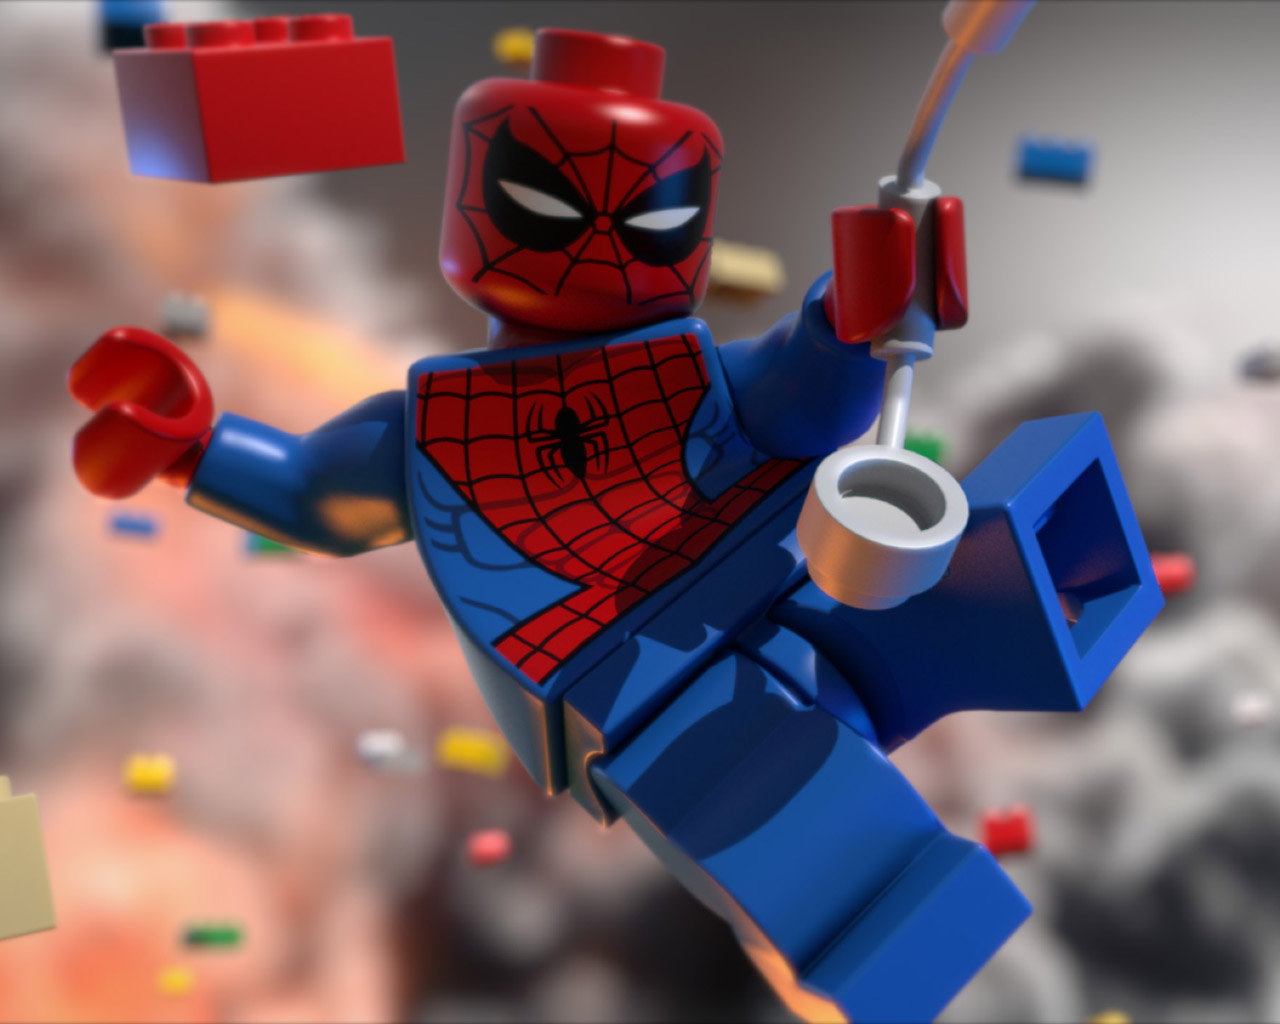 Free Lego Marvel Super Heroes Wallpaper in 1280x1024